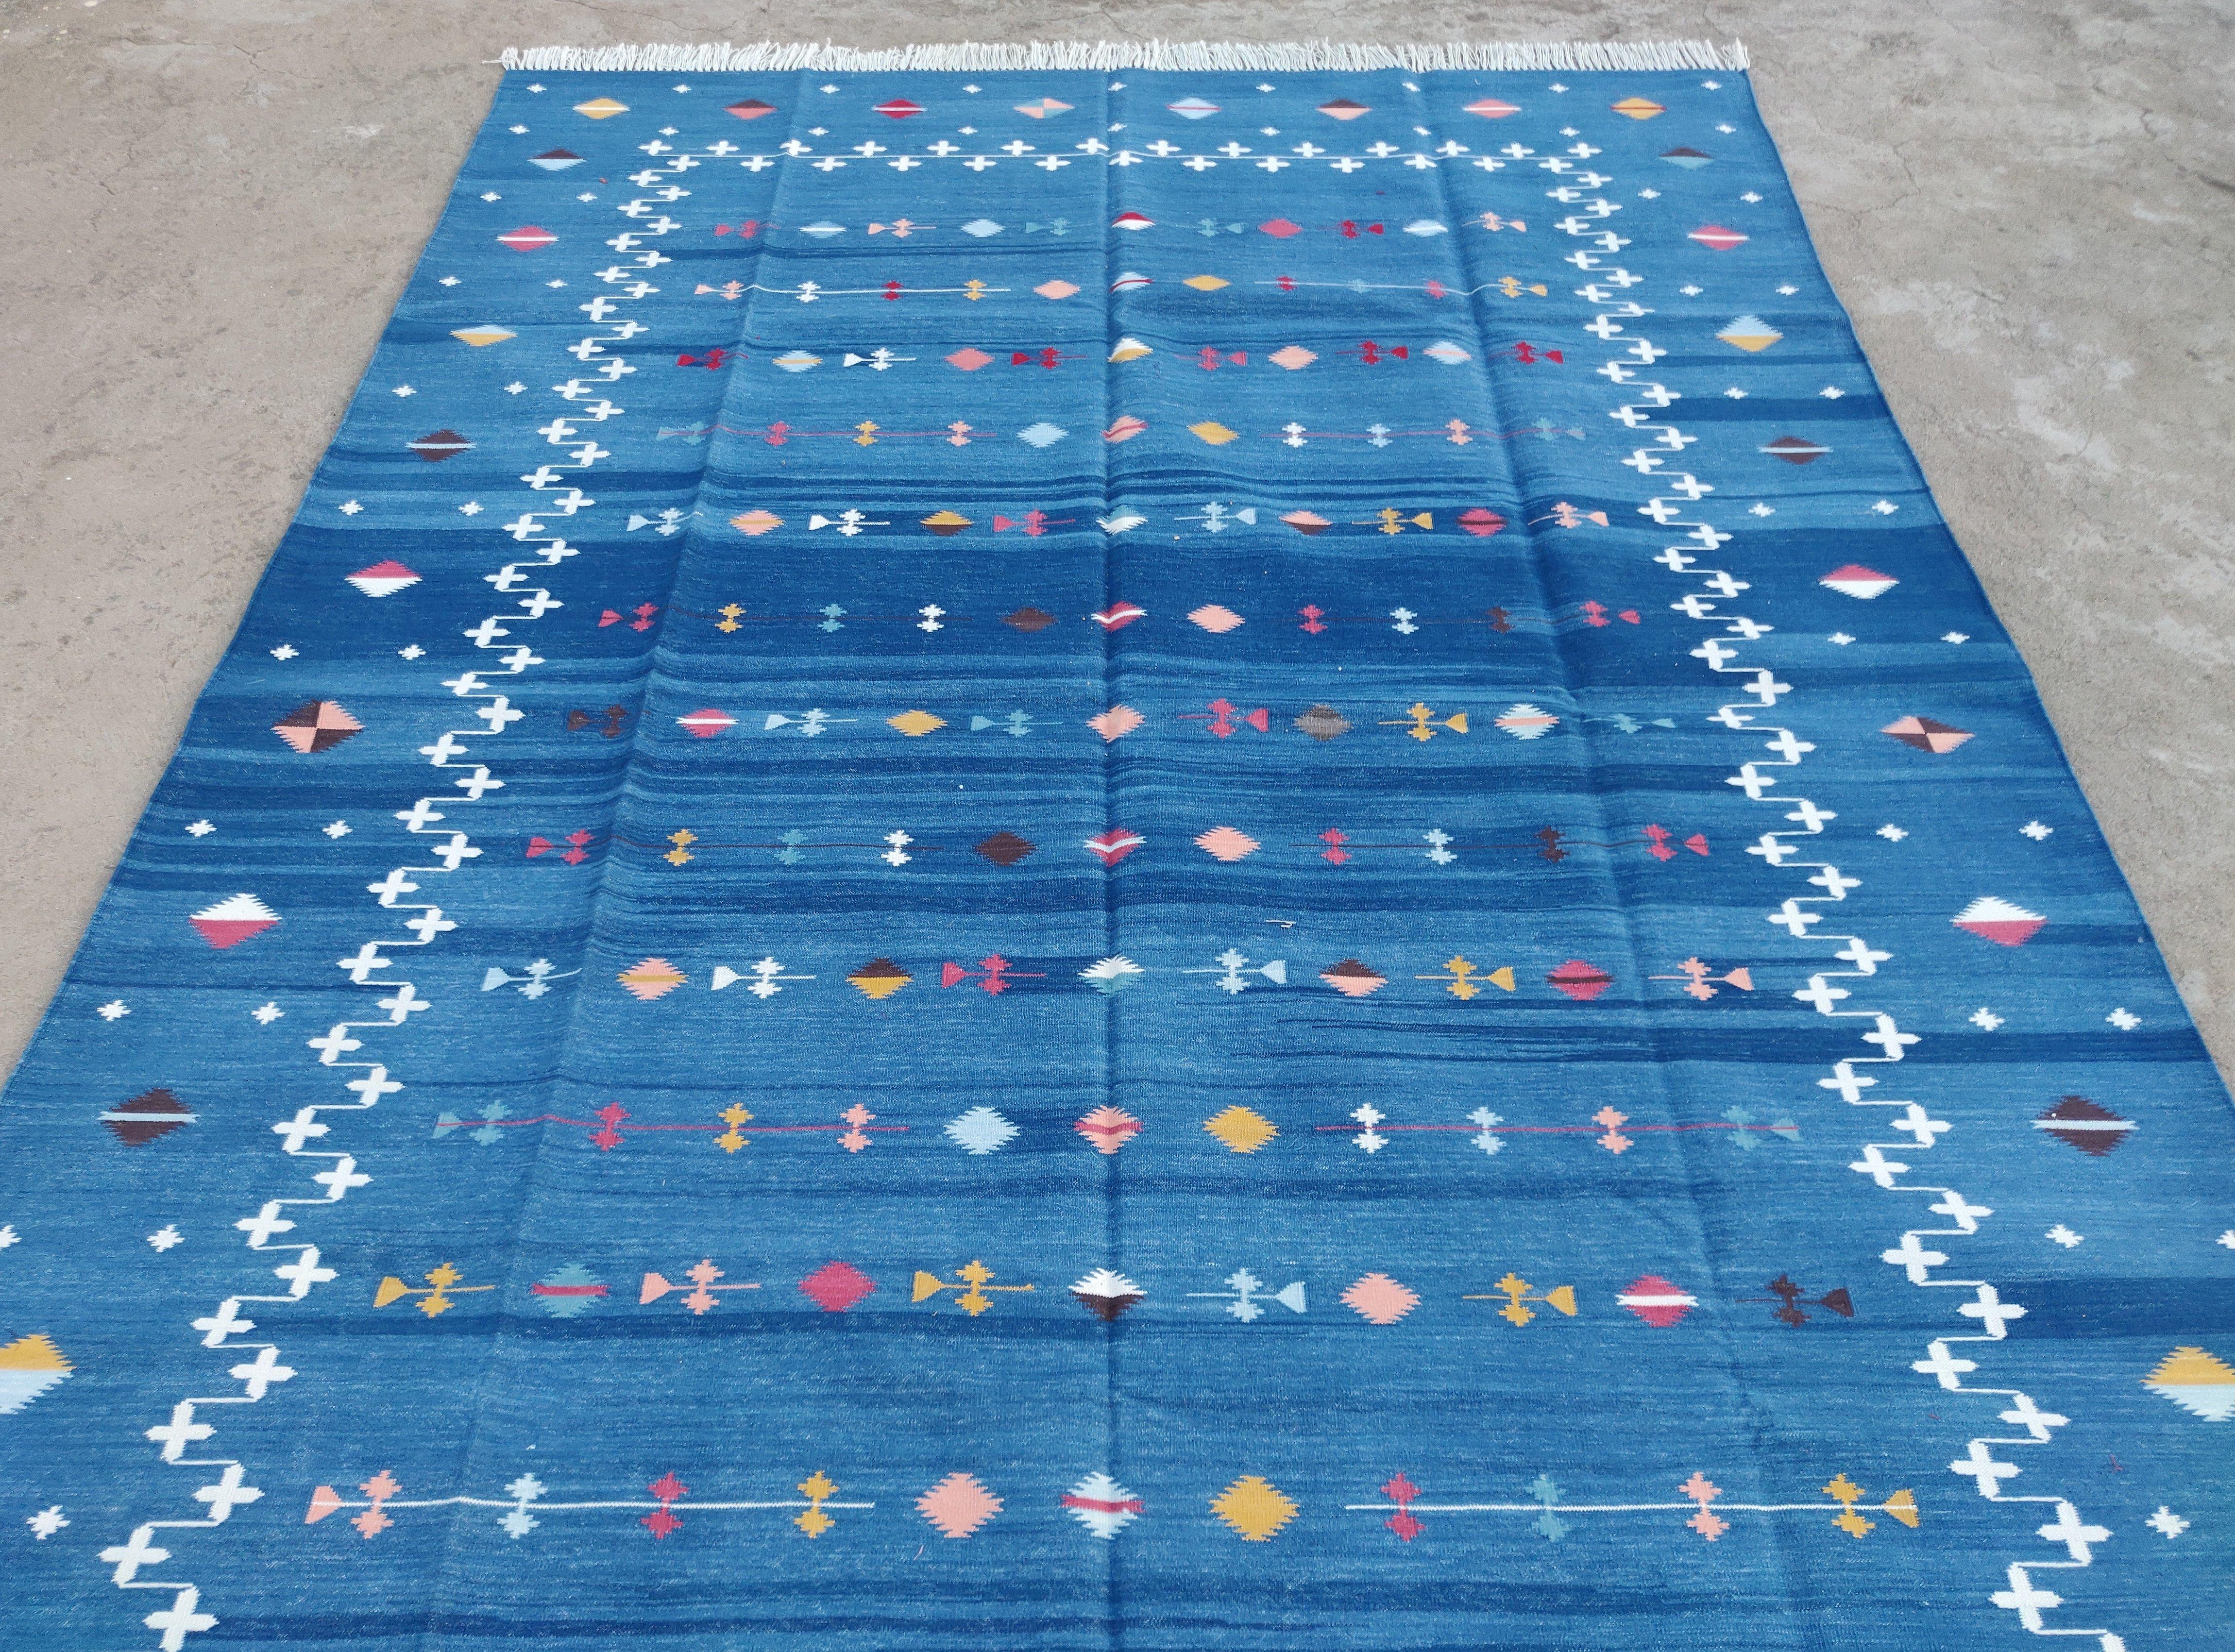 Handmade Cotton Area Flat Weave Rug, 6x9 Blue And White Shooting Star Dhurrie In New Condition For Sale In Jaipur, IN